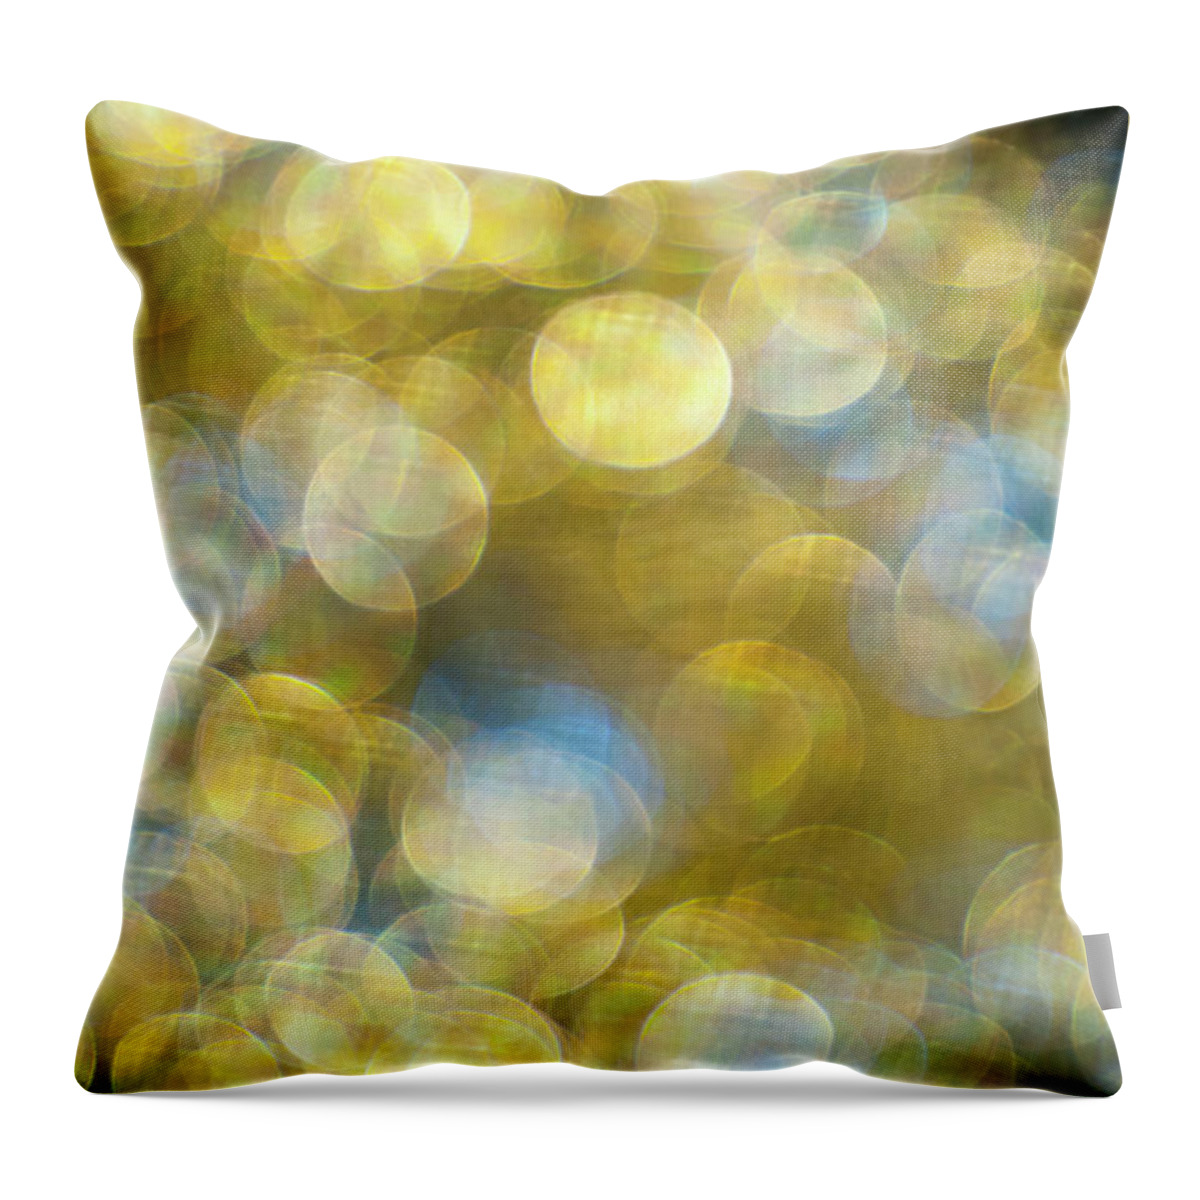 Holiday Throw Pillow featuring the photograph Abstract Spots Of Light by Brian Stablyk